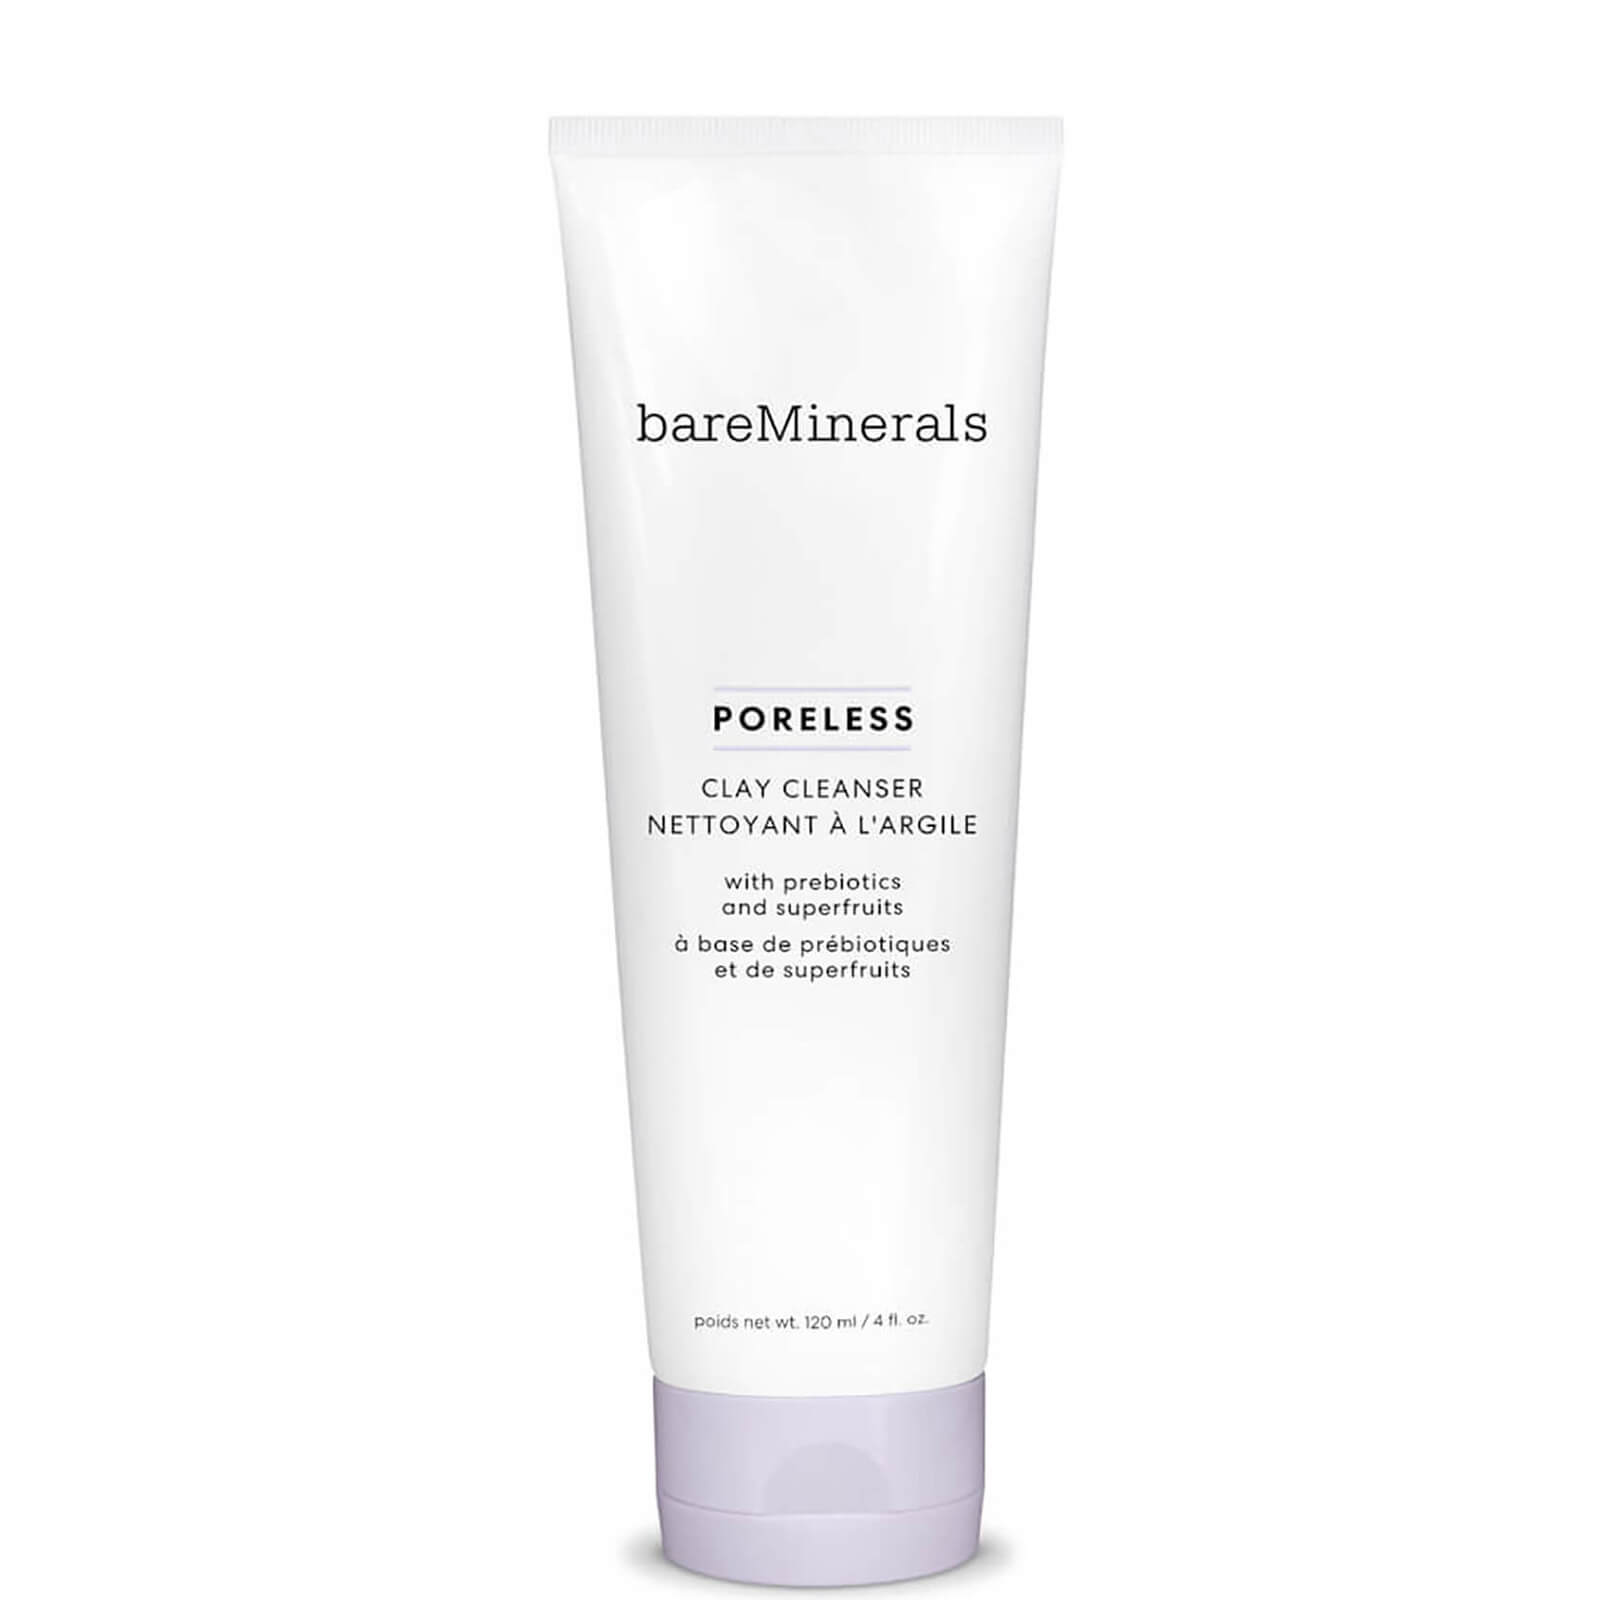 Photos - Facial / Body Cleansing Product bareMinerals Poreless Clay Cleanser 120ml 92855 